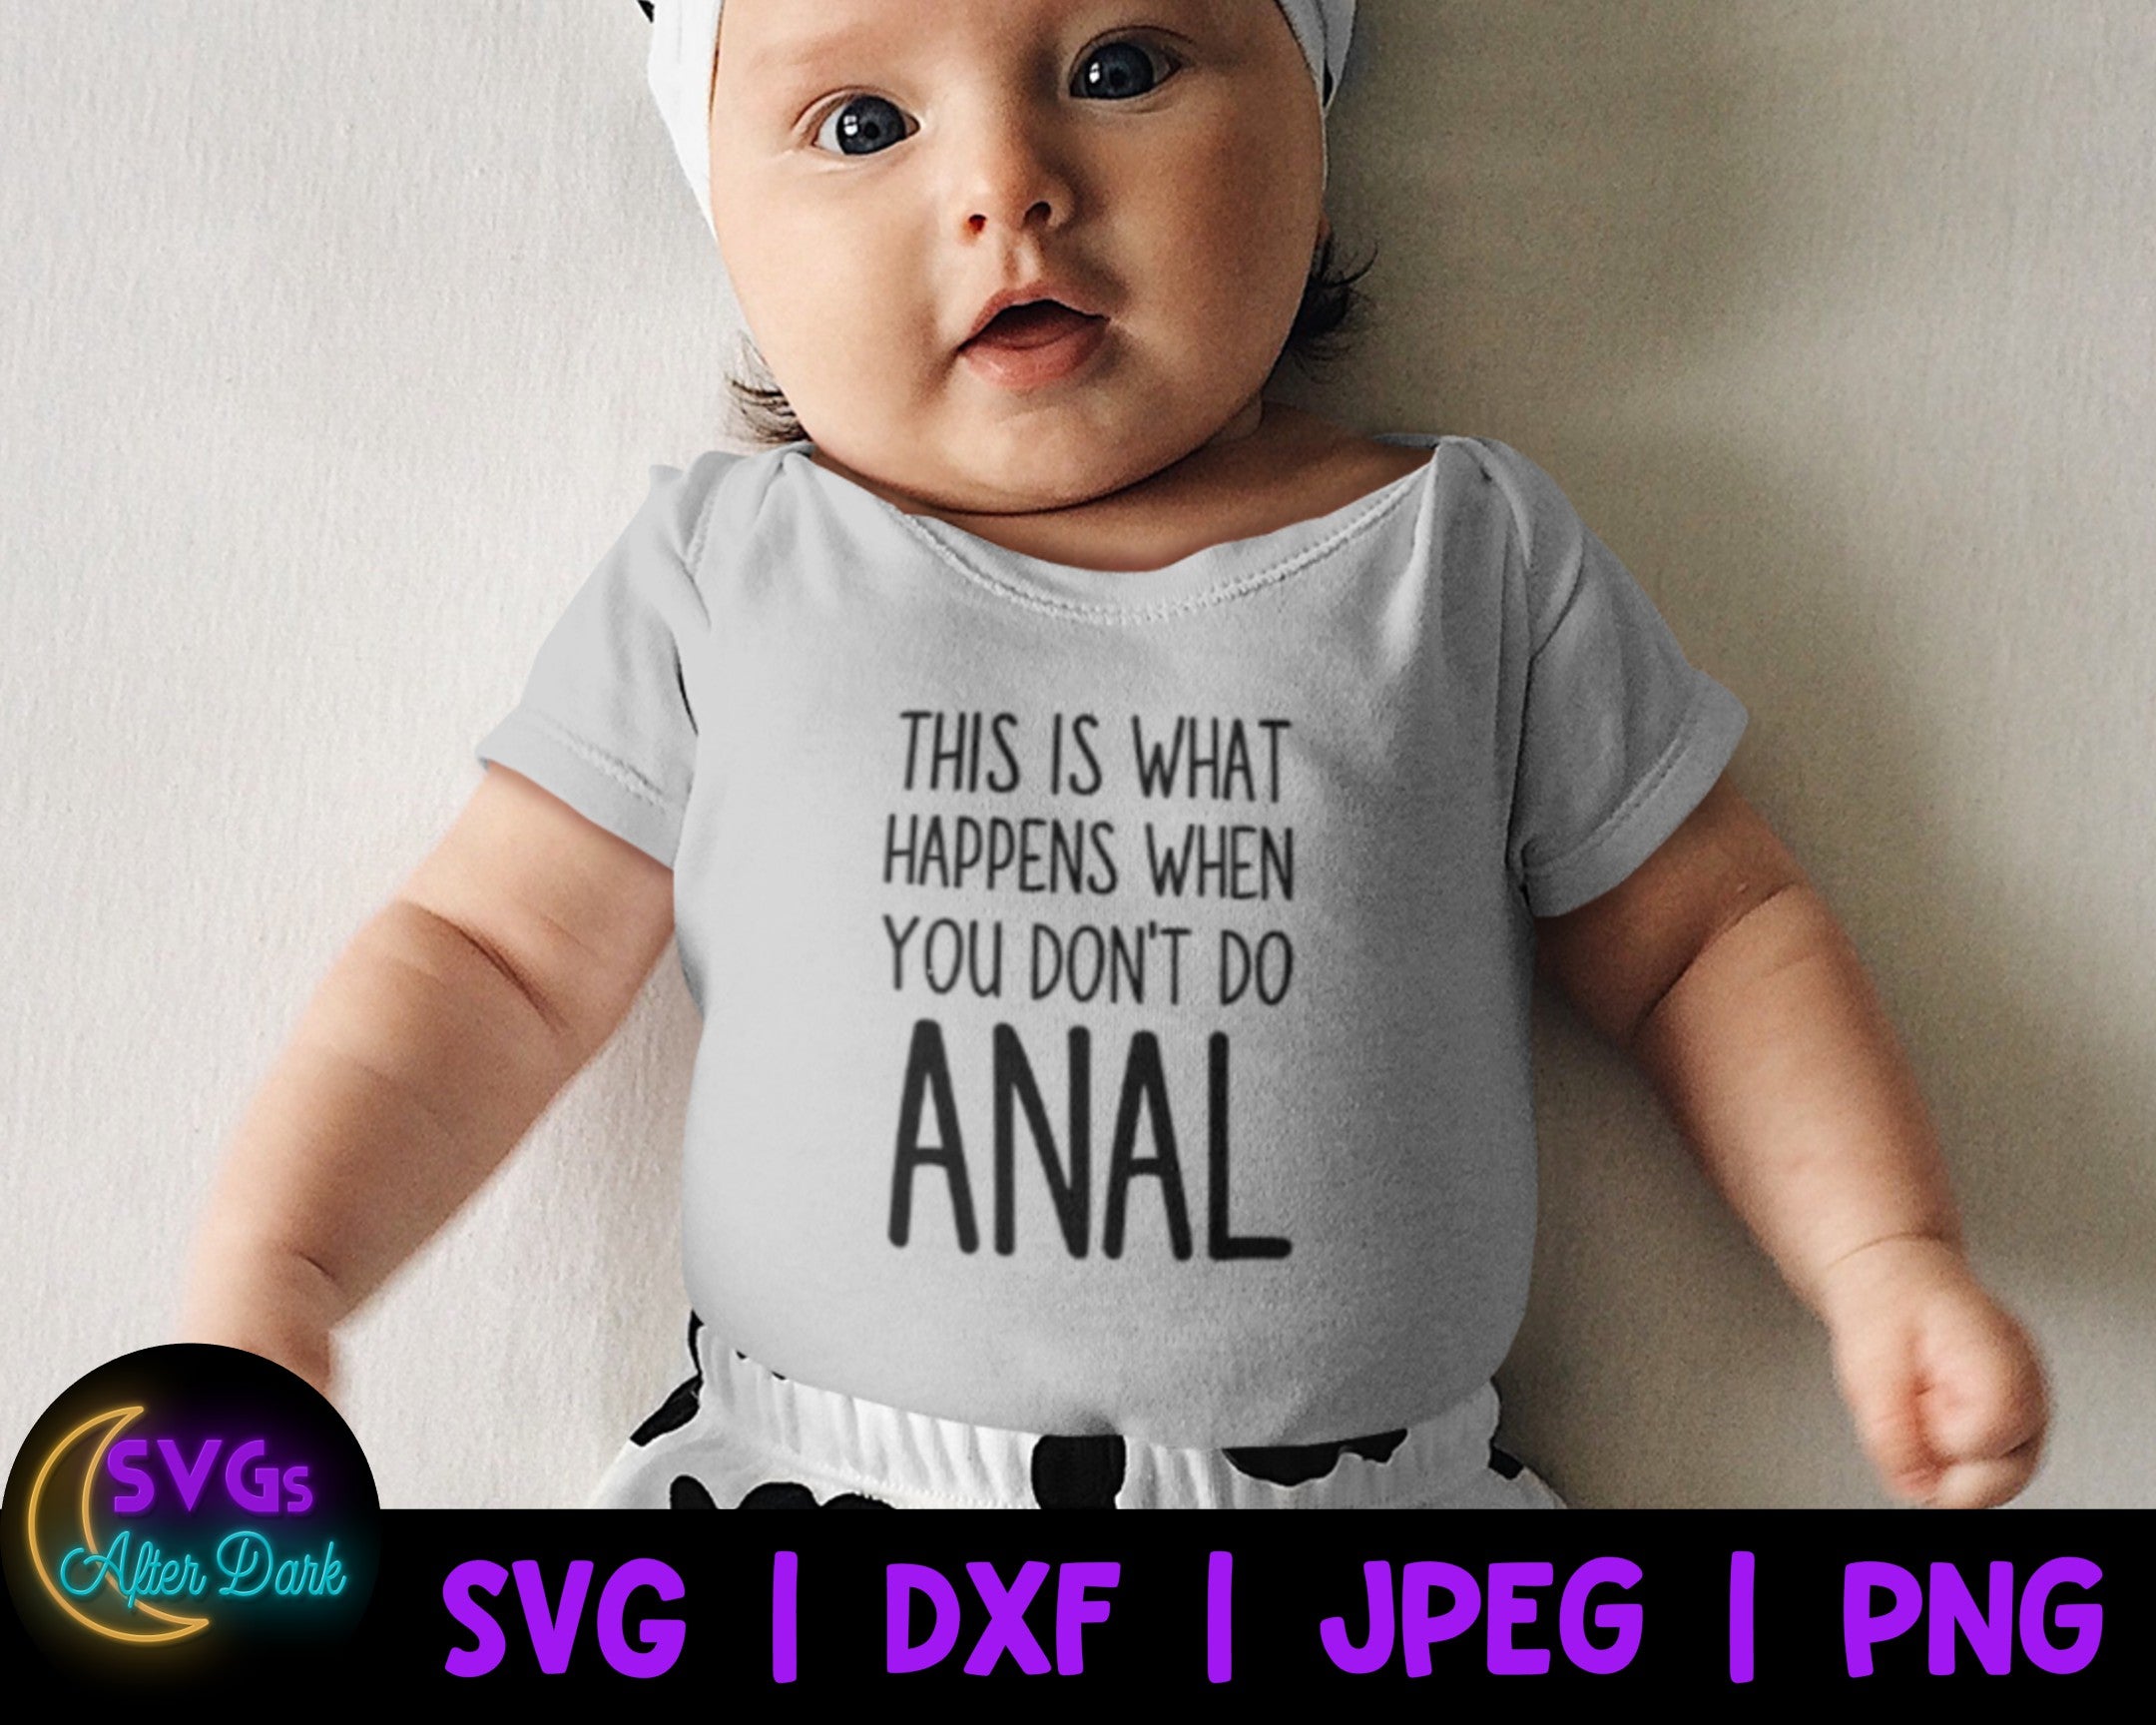 NSFW SVG - Crude and Funny Baby Bodysuit SVG Bundle - Naughty Bodysuit Bundle - Funny Kid outfits